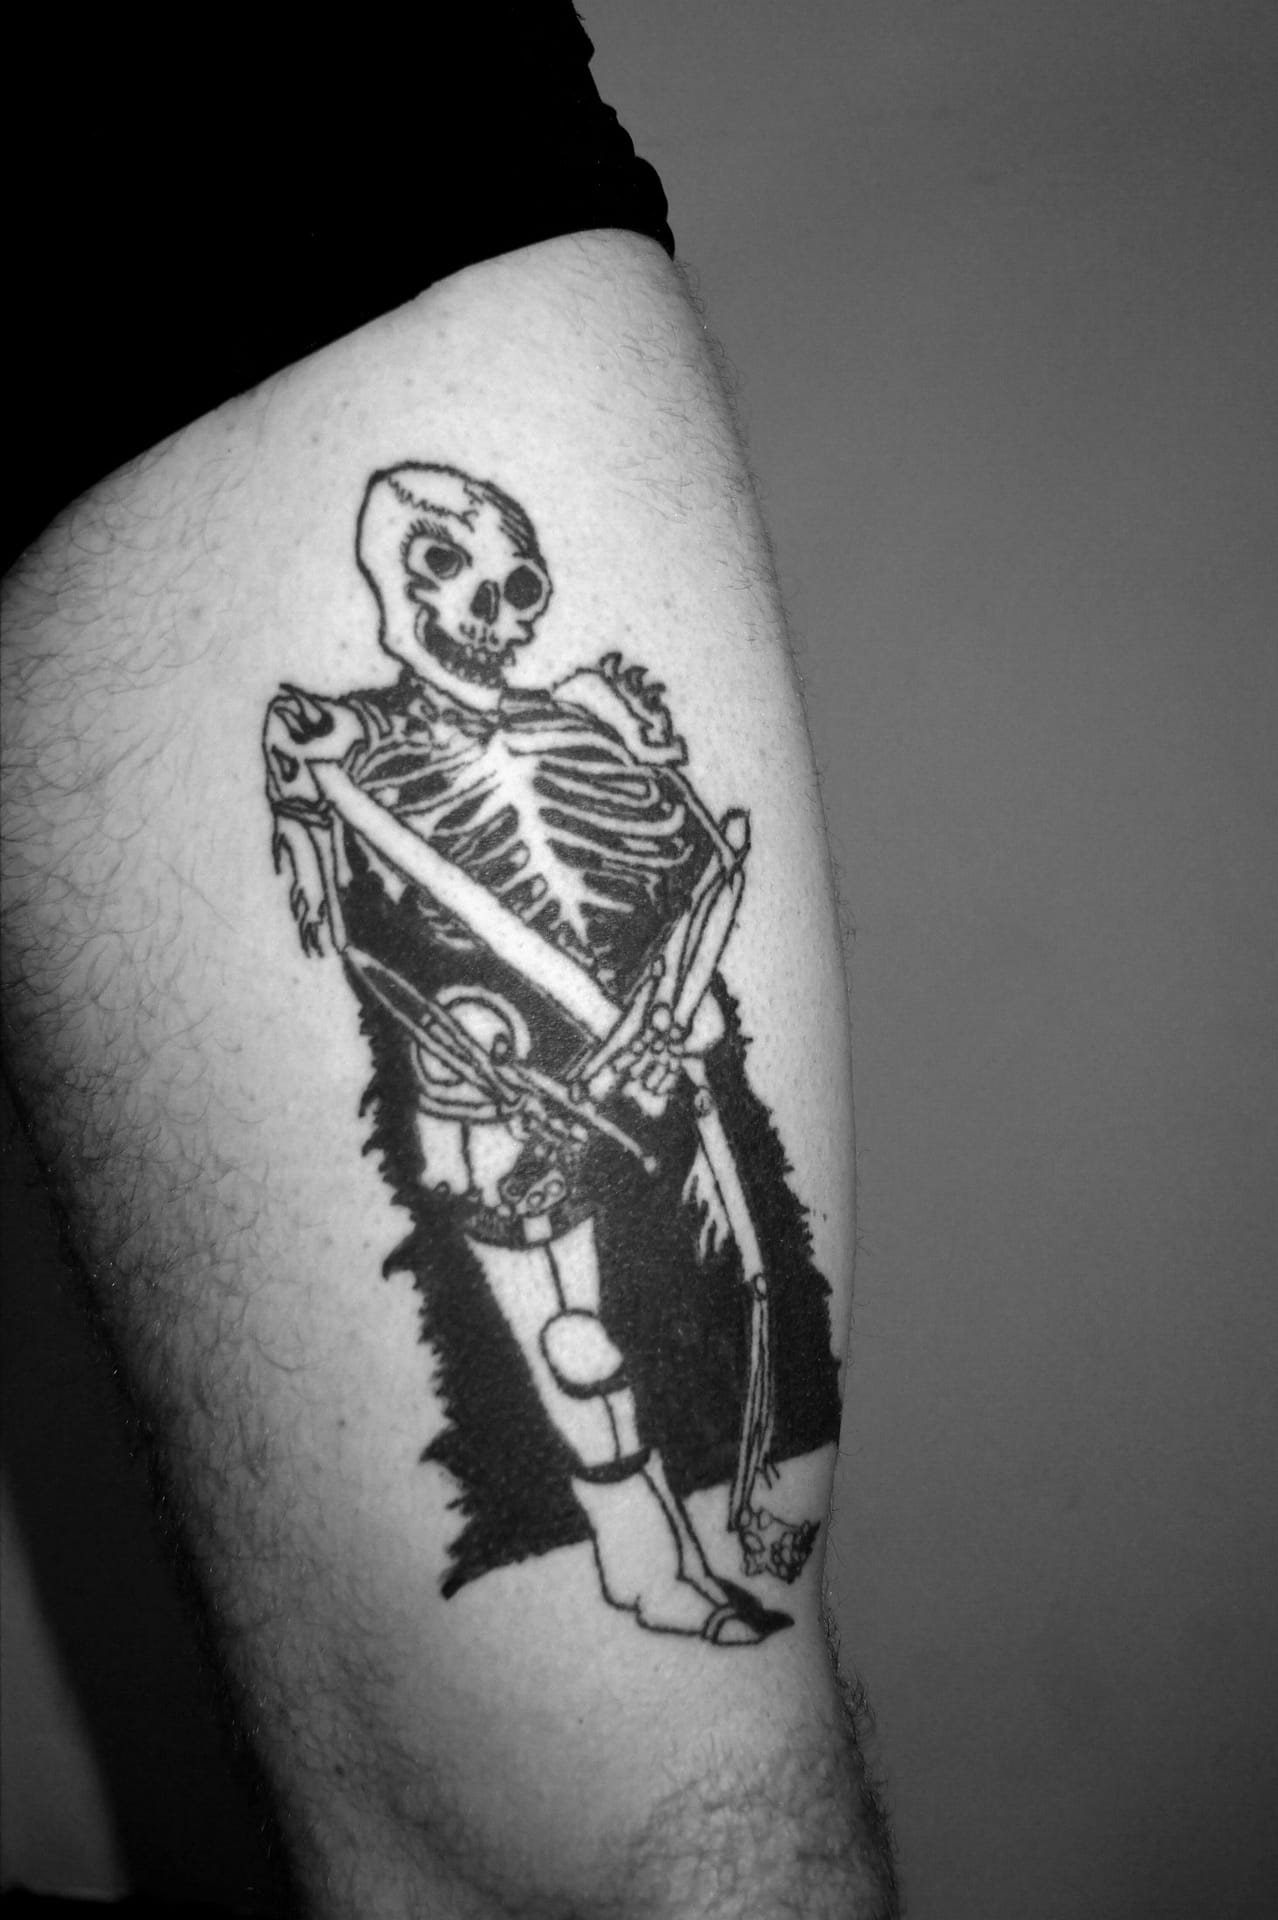 Red Baron Ink Tattoo  Had a blast with this Skeleton Warrior Tattoos by